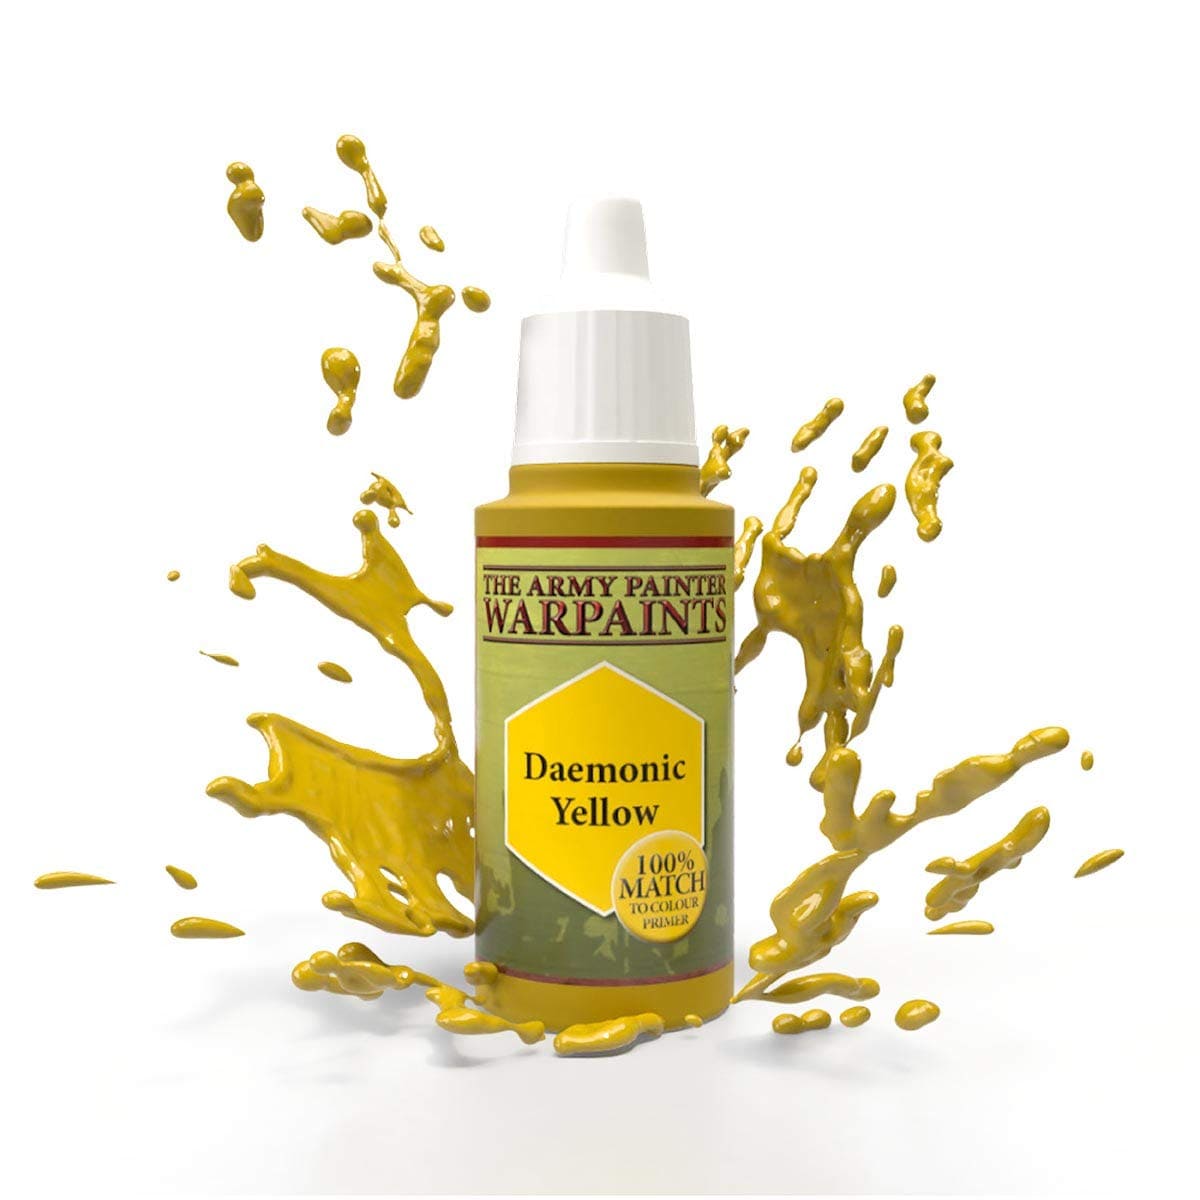 The Army Painter Accessories The Army Painter Warpaints: Daemonic Yellow 18ml